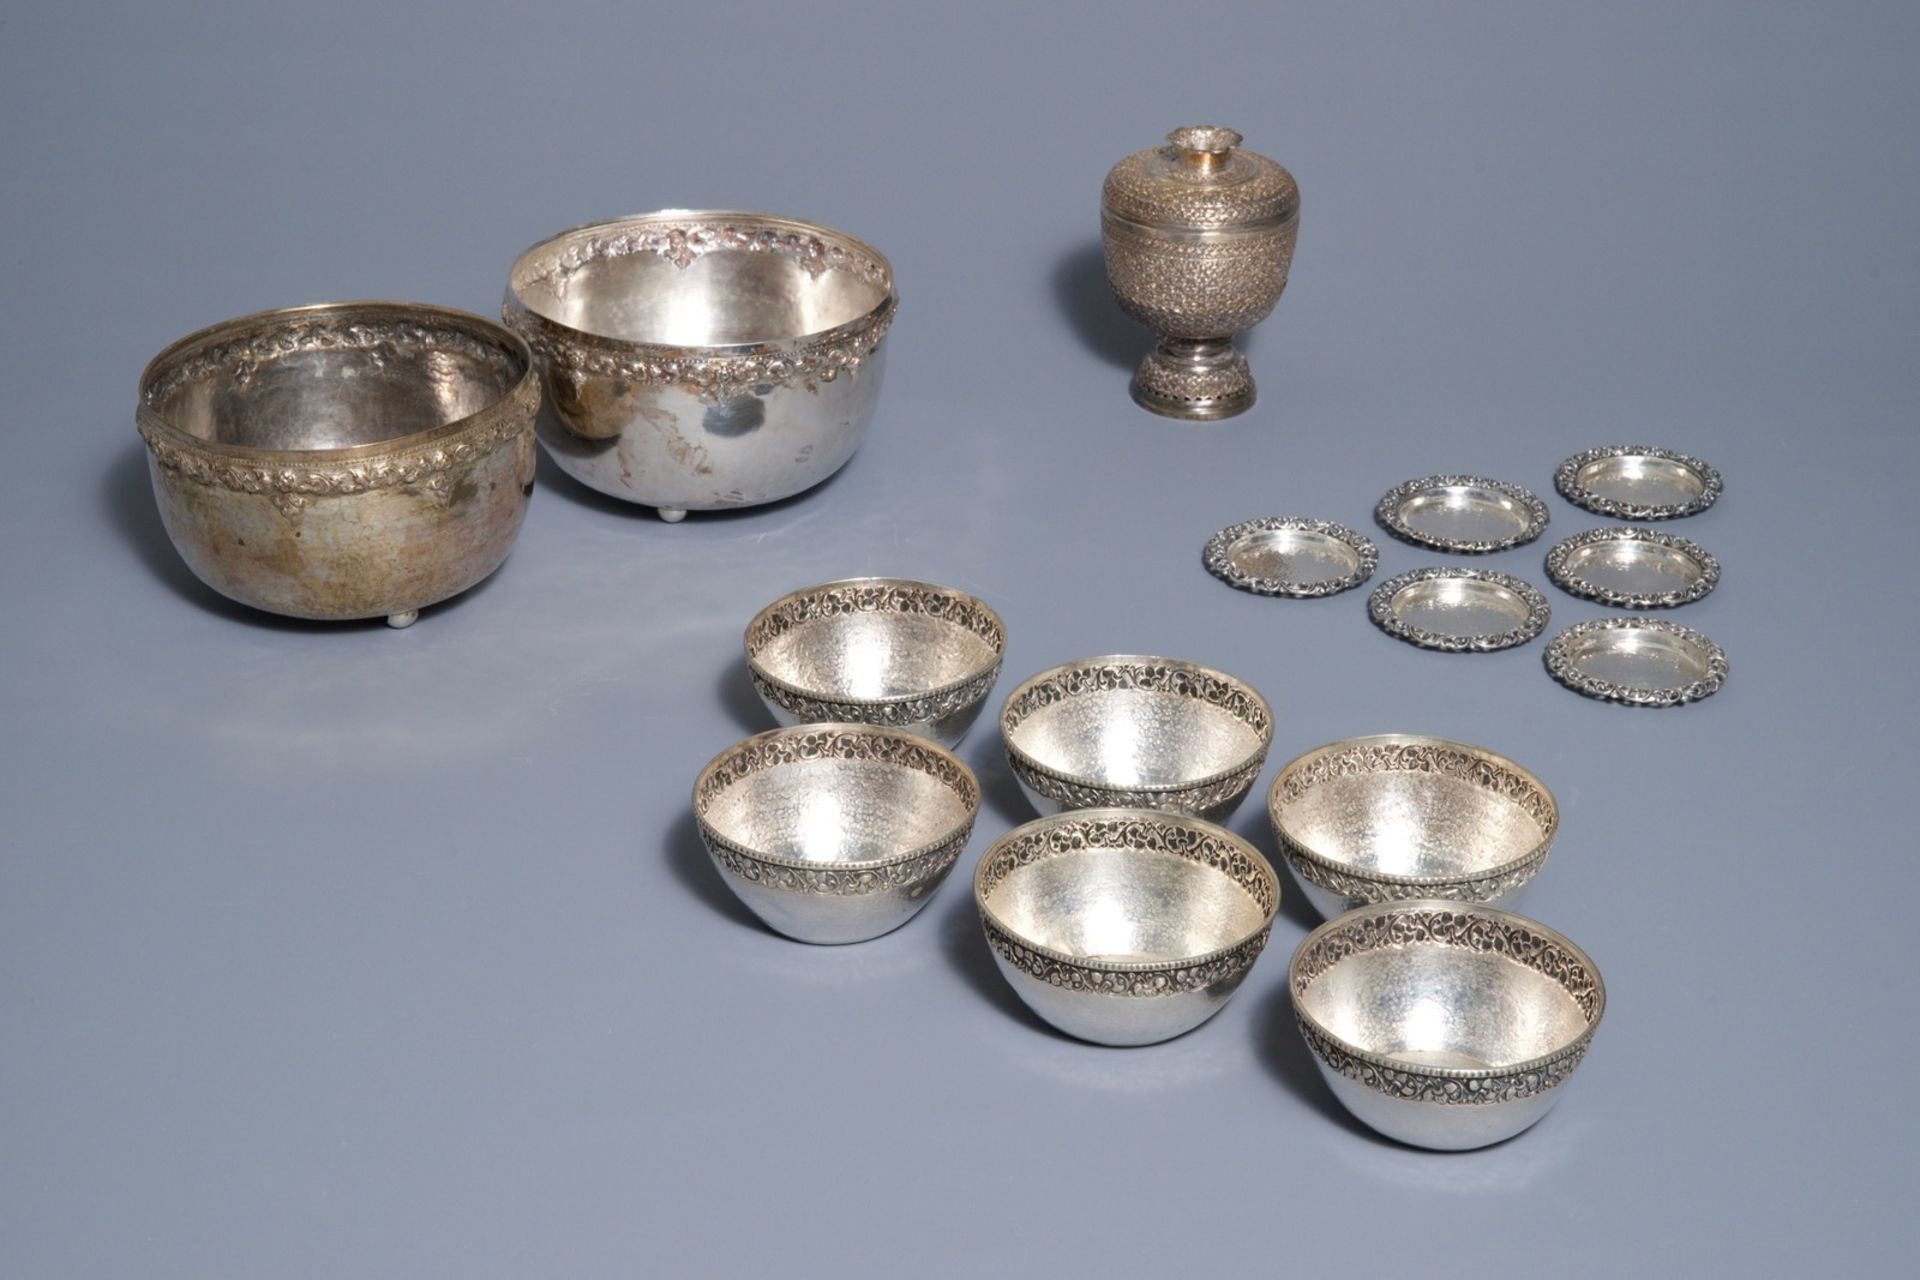 A varied collection of silver wares, South-East Asia, 19/20th C. - Image 2 of 2